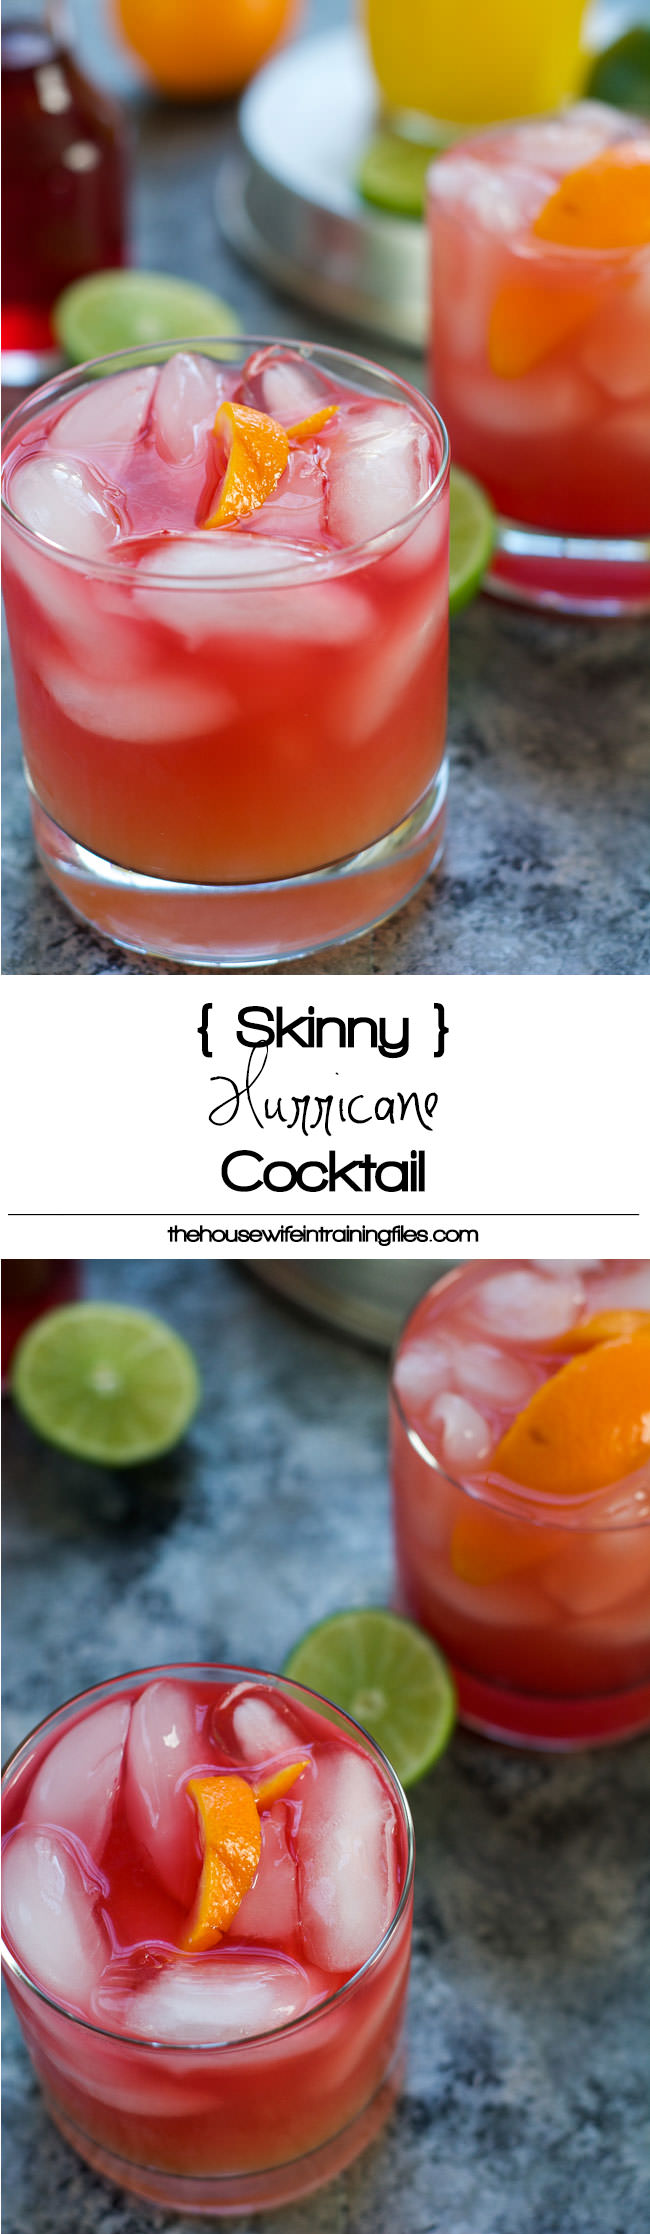 This Skinny Hurricane Cocktail is a healthier version of the classic Mardi Gras drink is filled with orange and cranberry juice and finished with light rum for a refreshing cocktail!